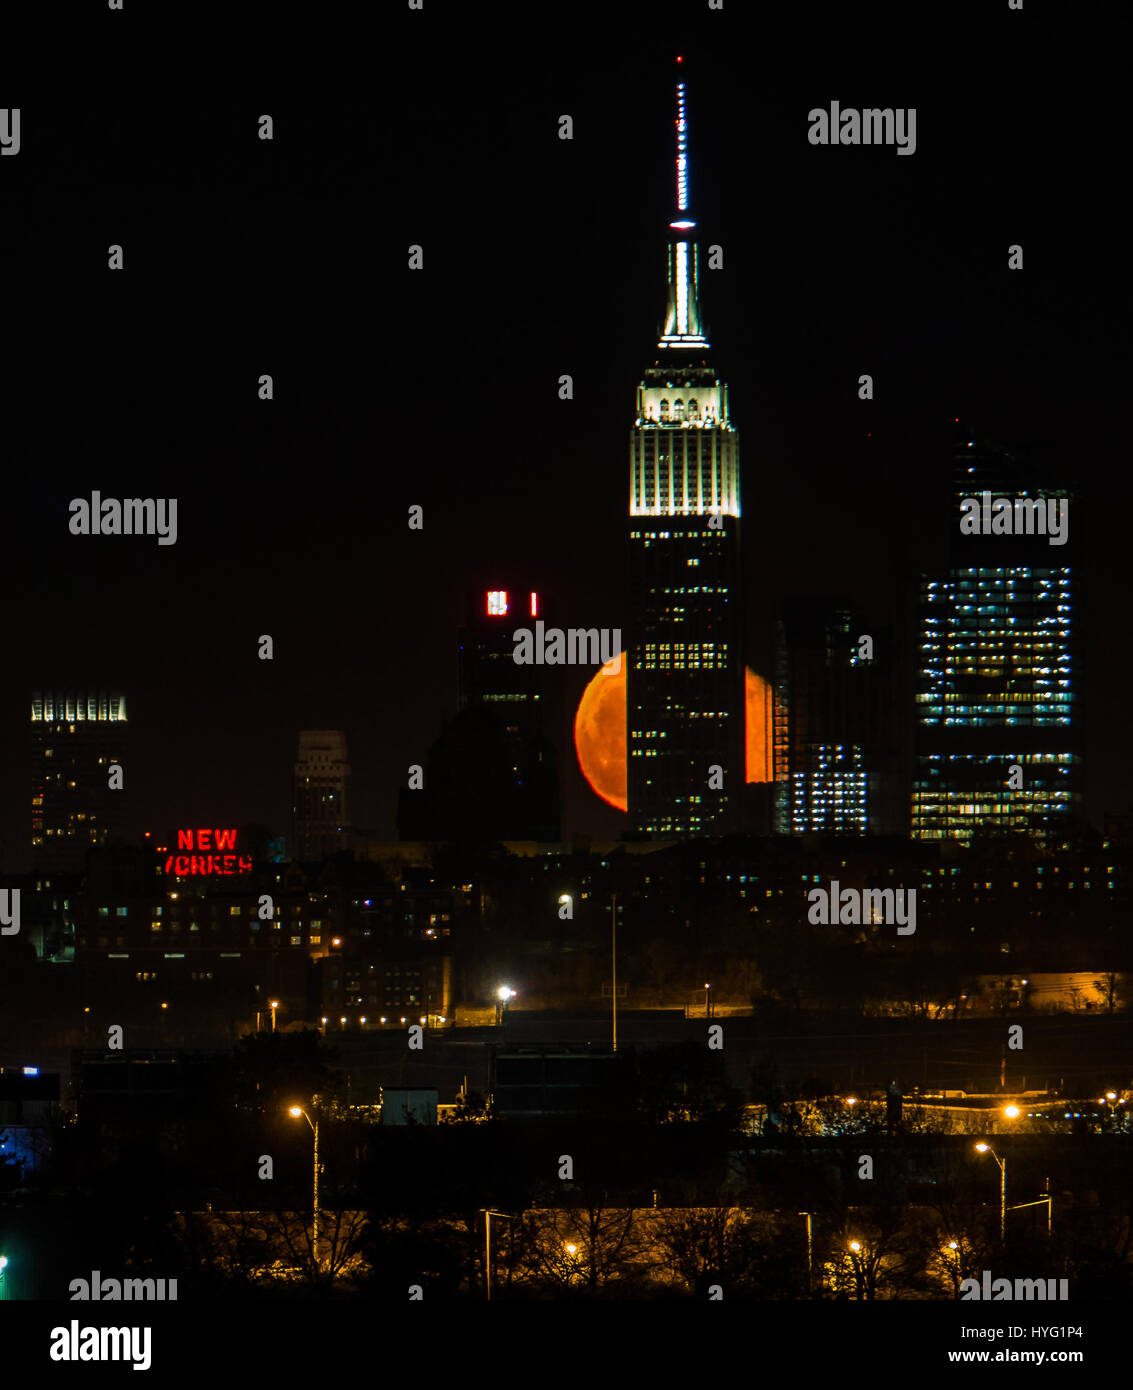 NEW YORK, USA: New York's iconic Empire State Building. CAUGHT between the moon and New York City the statue of liberty appears to have her torch lit with an orange ball of light. Incredible images show the full blood moon rising up over the iconic green lady, illuminating the city below in orange hues.  Other pictures show the Empire State building being back lit by this spectacular celestial disc. American technical writer Jennifer Khordi (46) was able to capture these awe-inspiring shots from the skyline of Jersey City and Kearny town in New Jersey. Stock Photo